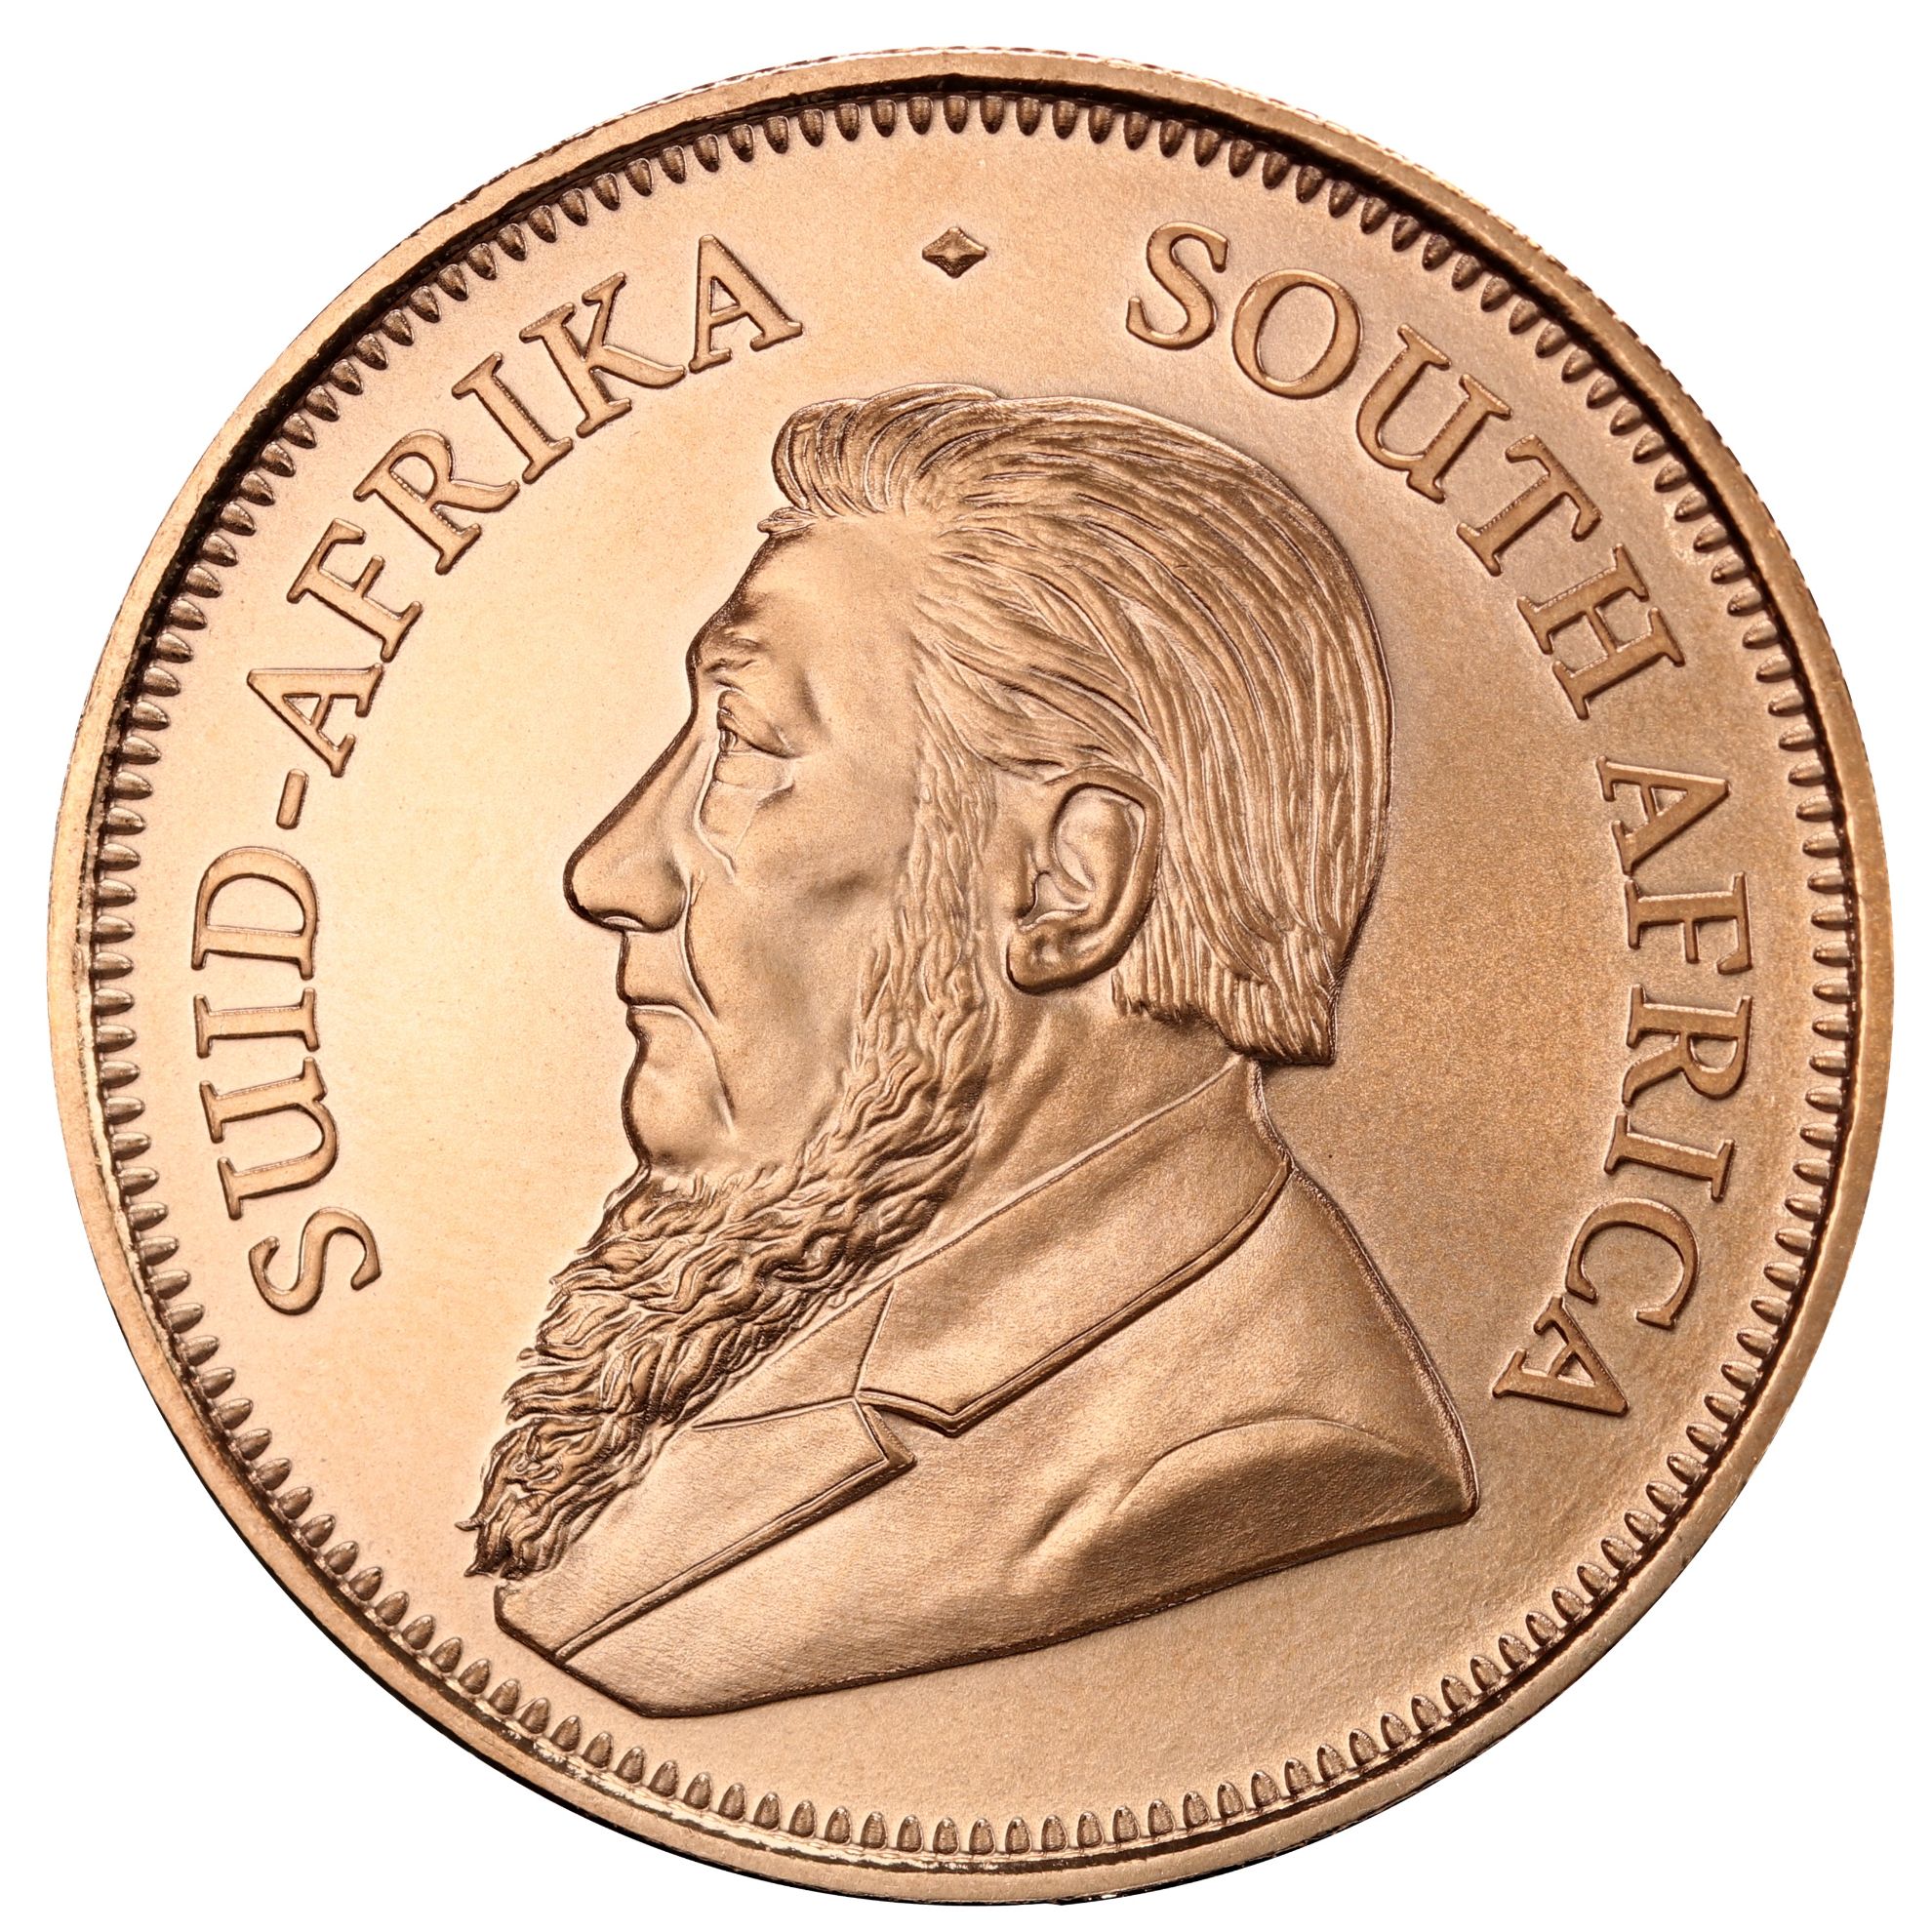 South Africa Krugerrand 1 ounce obverse